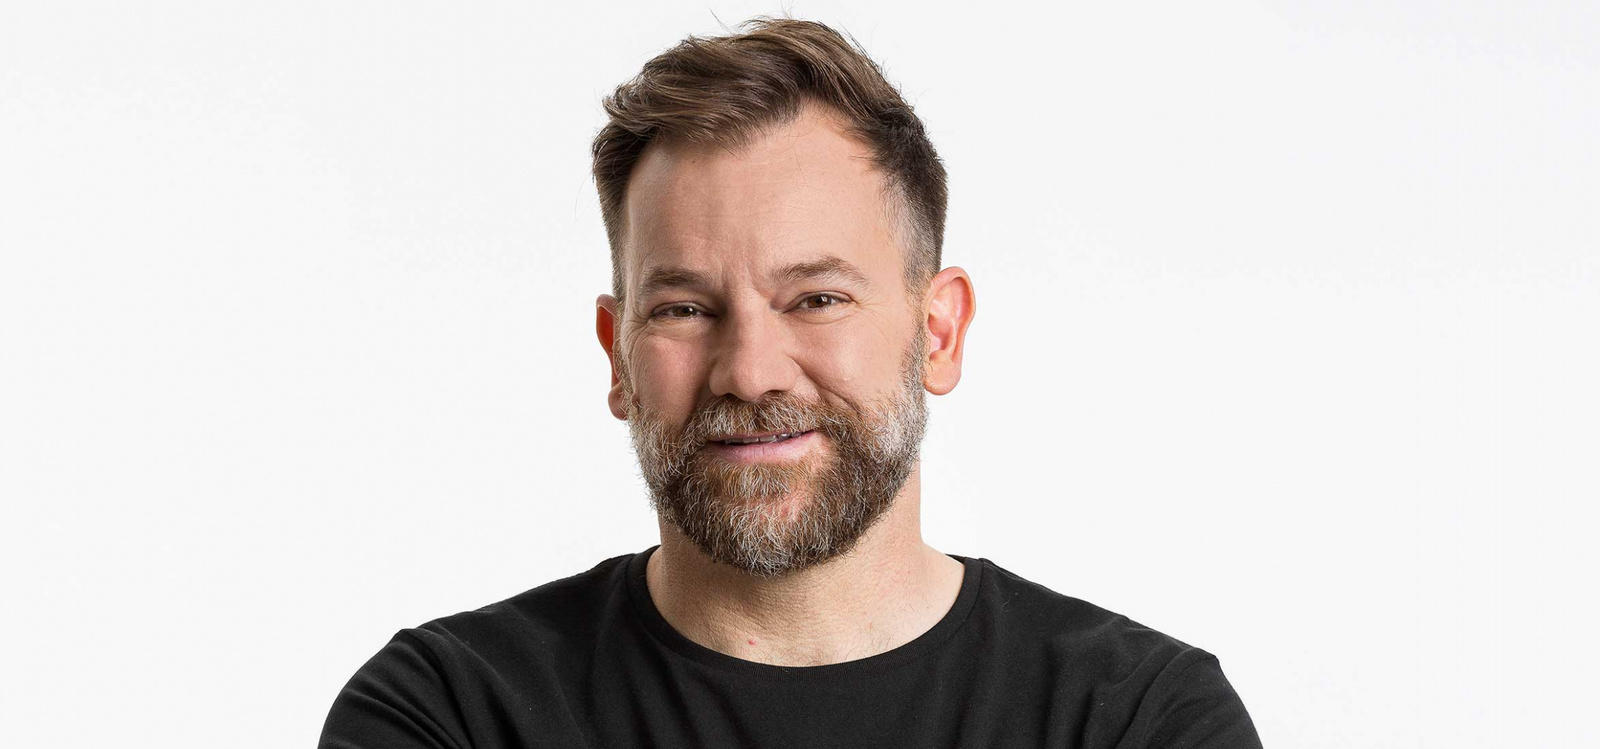 075: Lehmo - The comedic journey from balls to sails